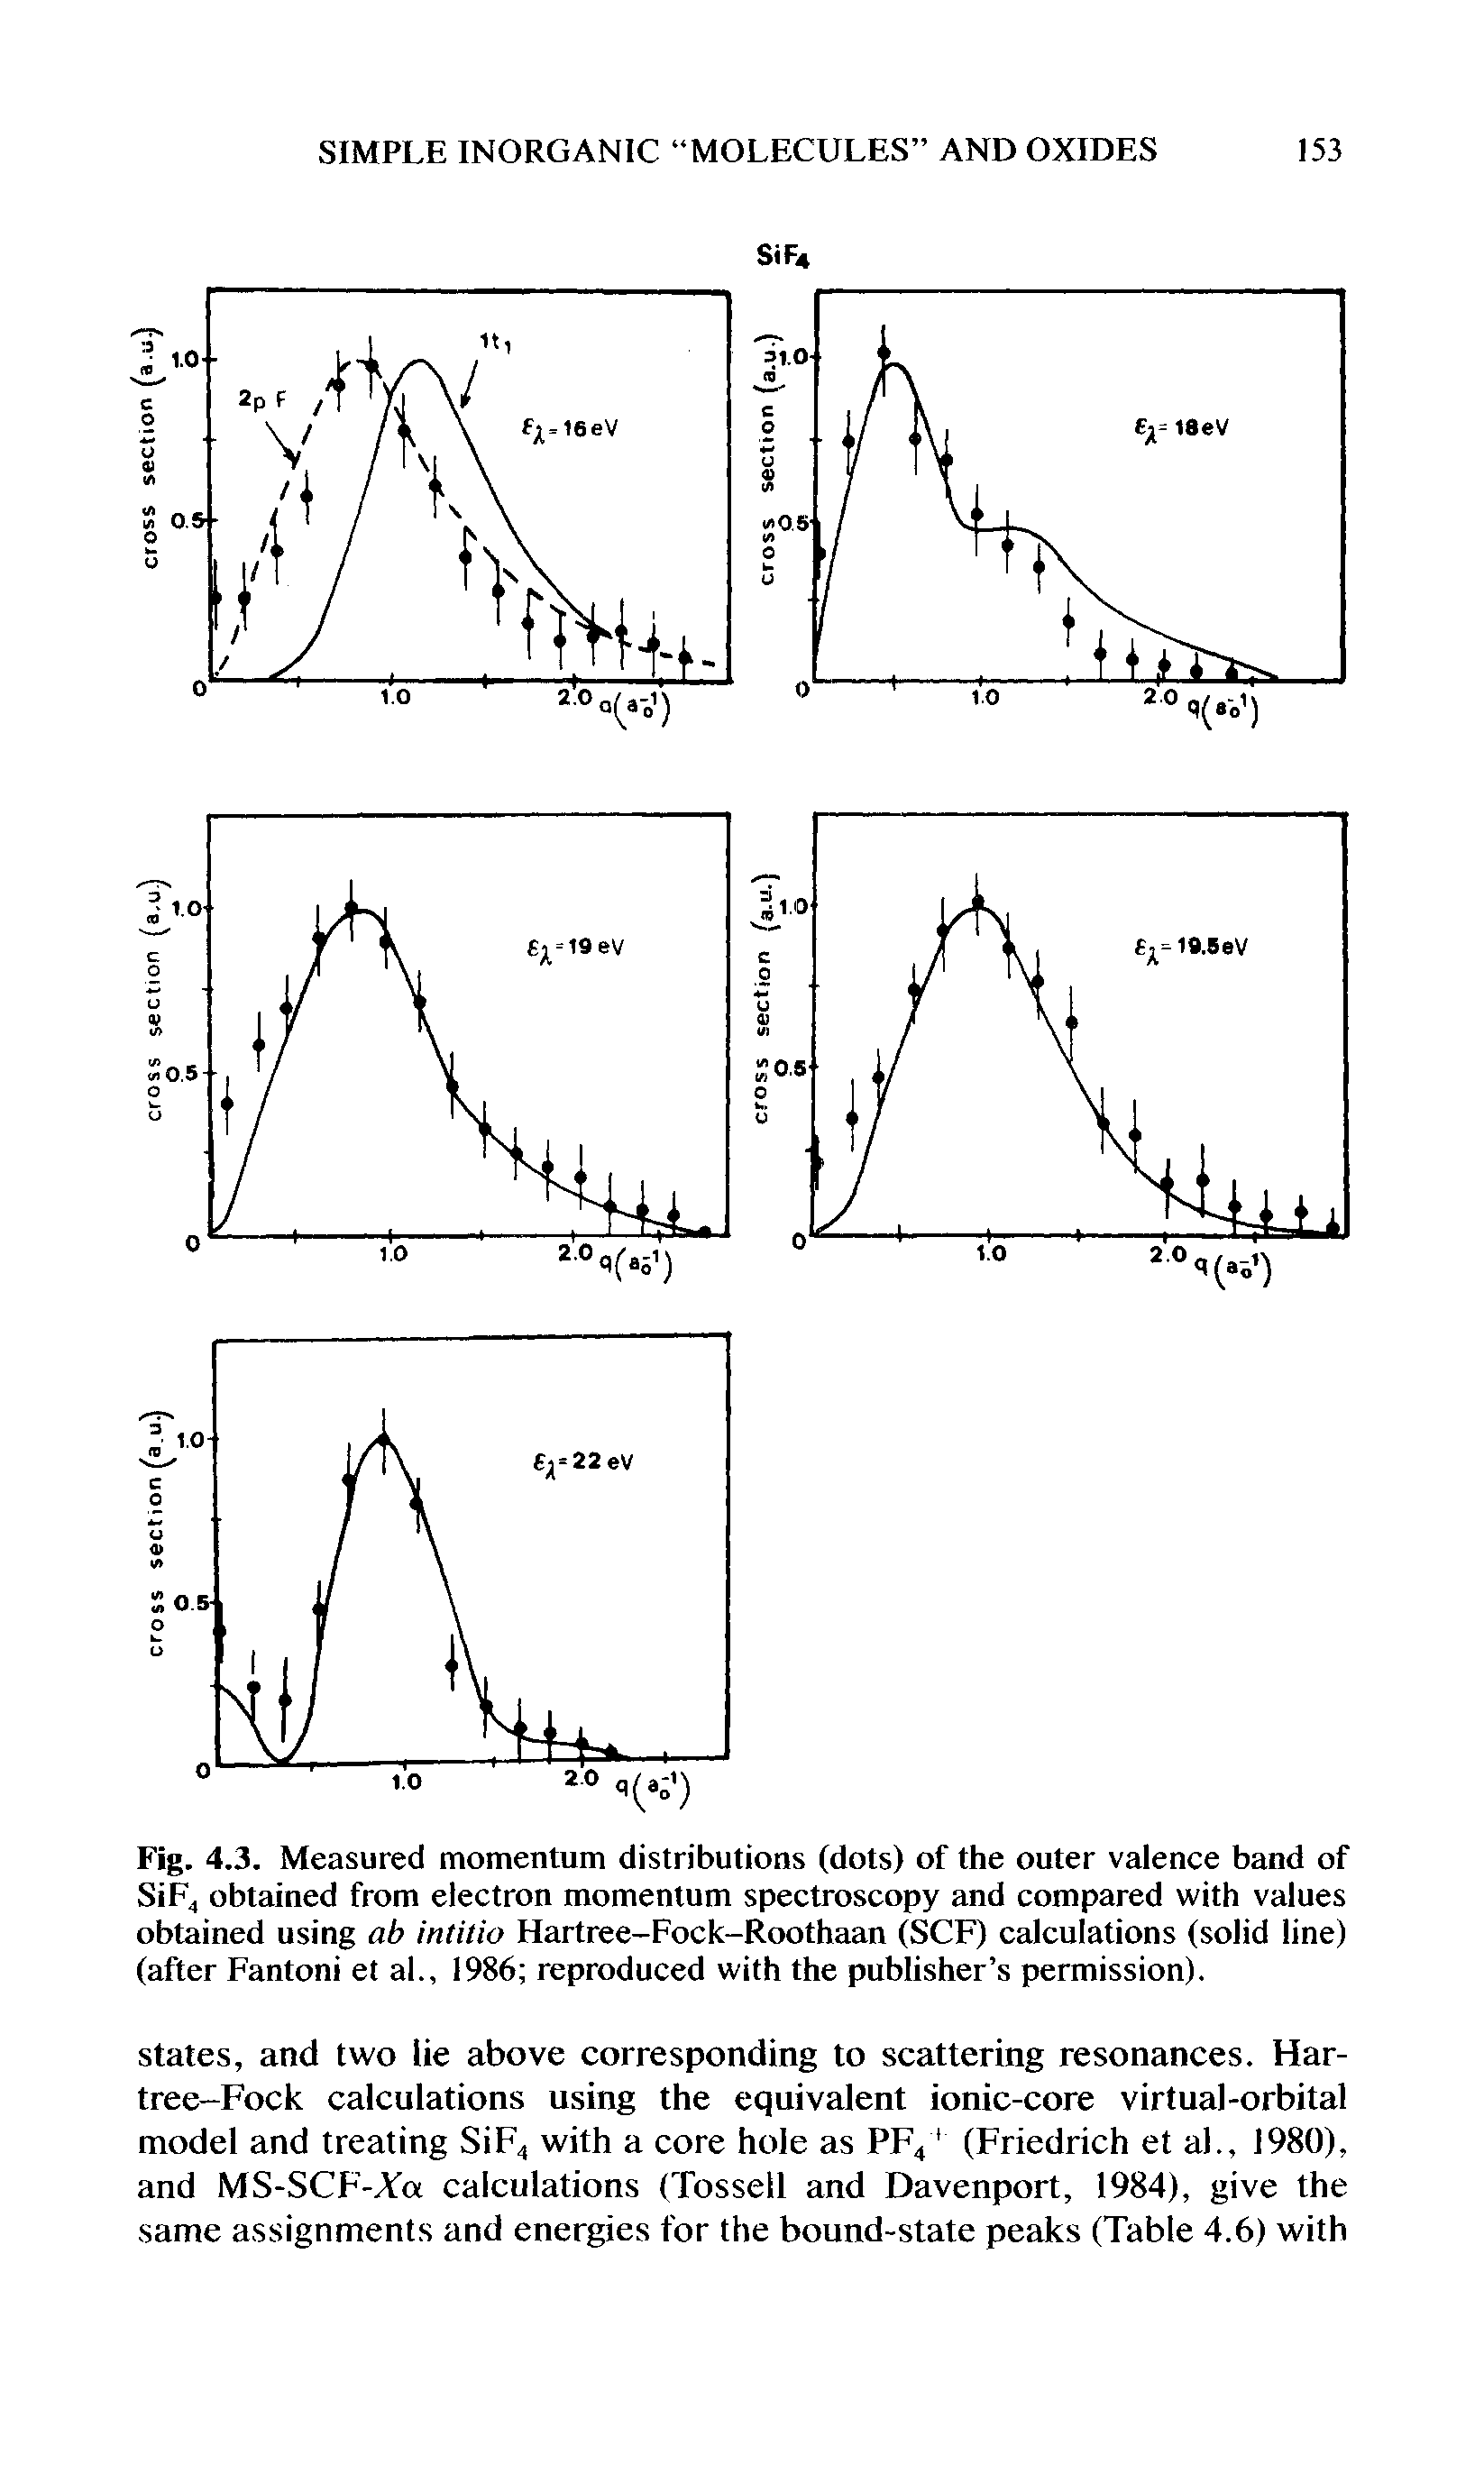 Fig. 4. 3. Measured momentum distributions (dots) of the outer valence band of SiF4 obtained from electron momentum spectroscopy and compared with values obtained using ab intitio Hartree-Fock-Roothaan (SCF) calculations (solid line) (after Fantoni et al., 1986 reproduced with the publisher s permission).